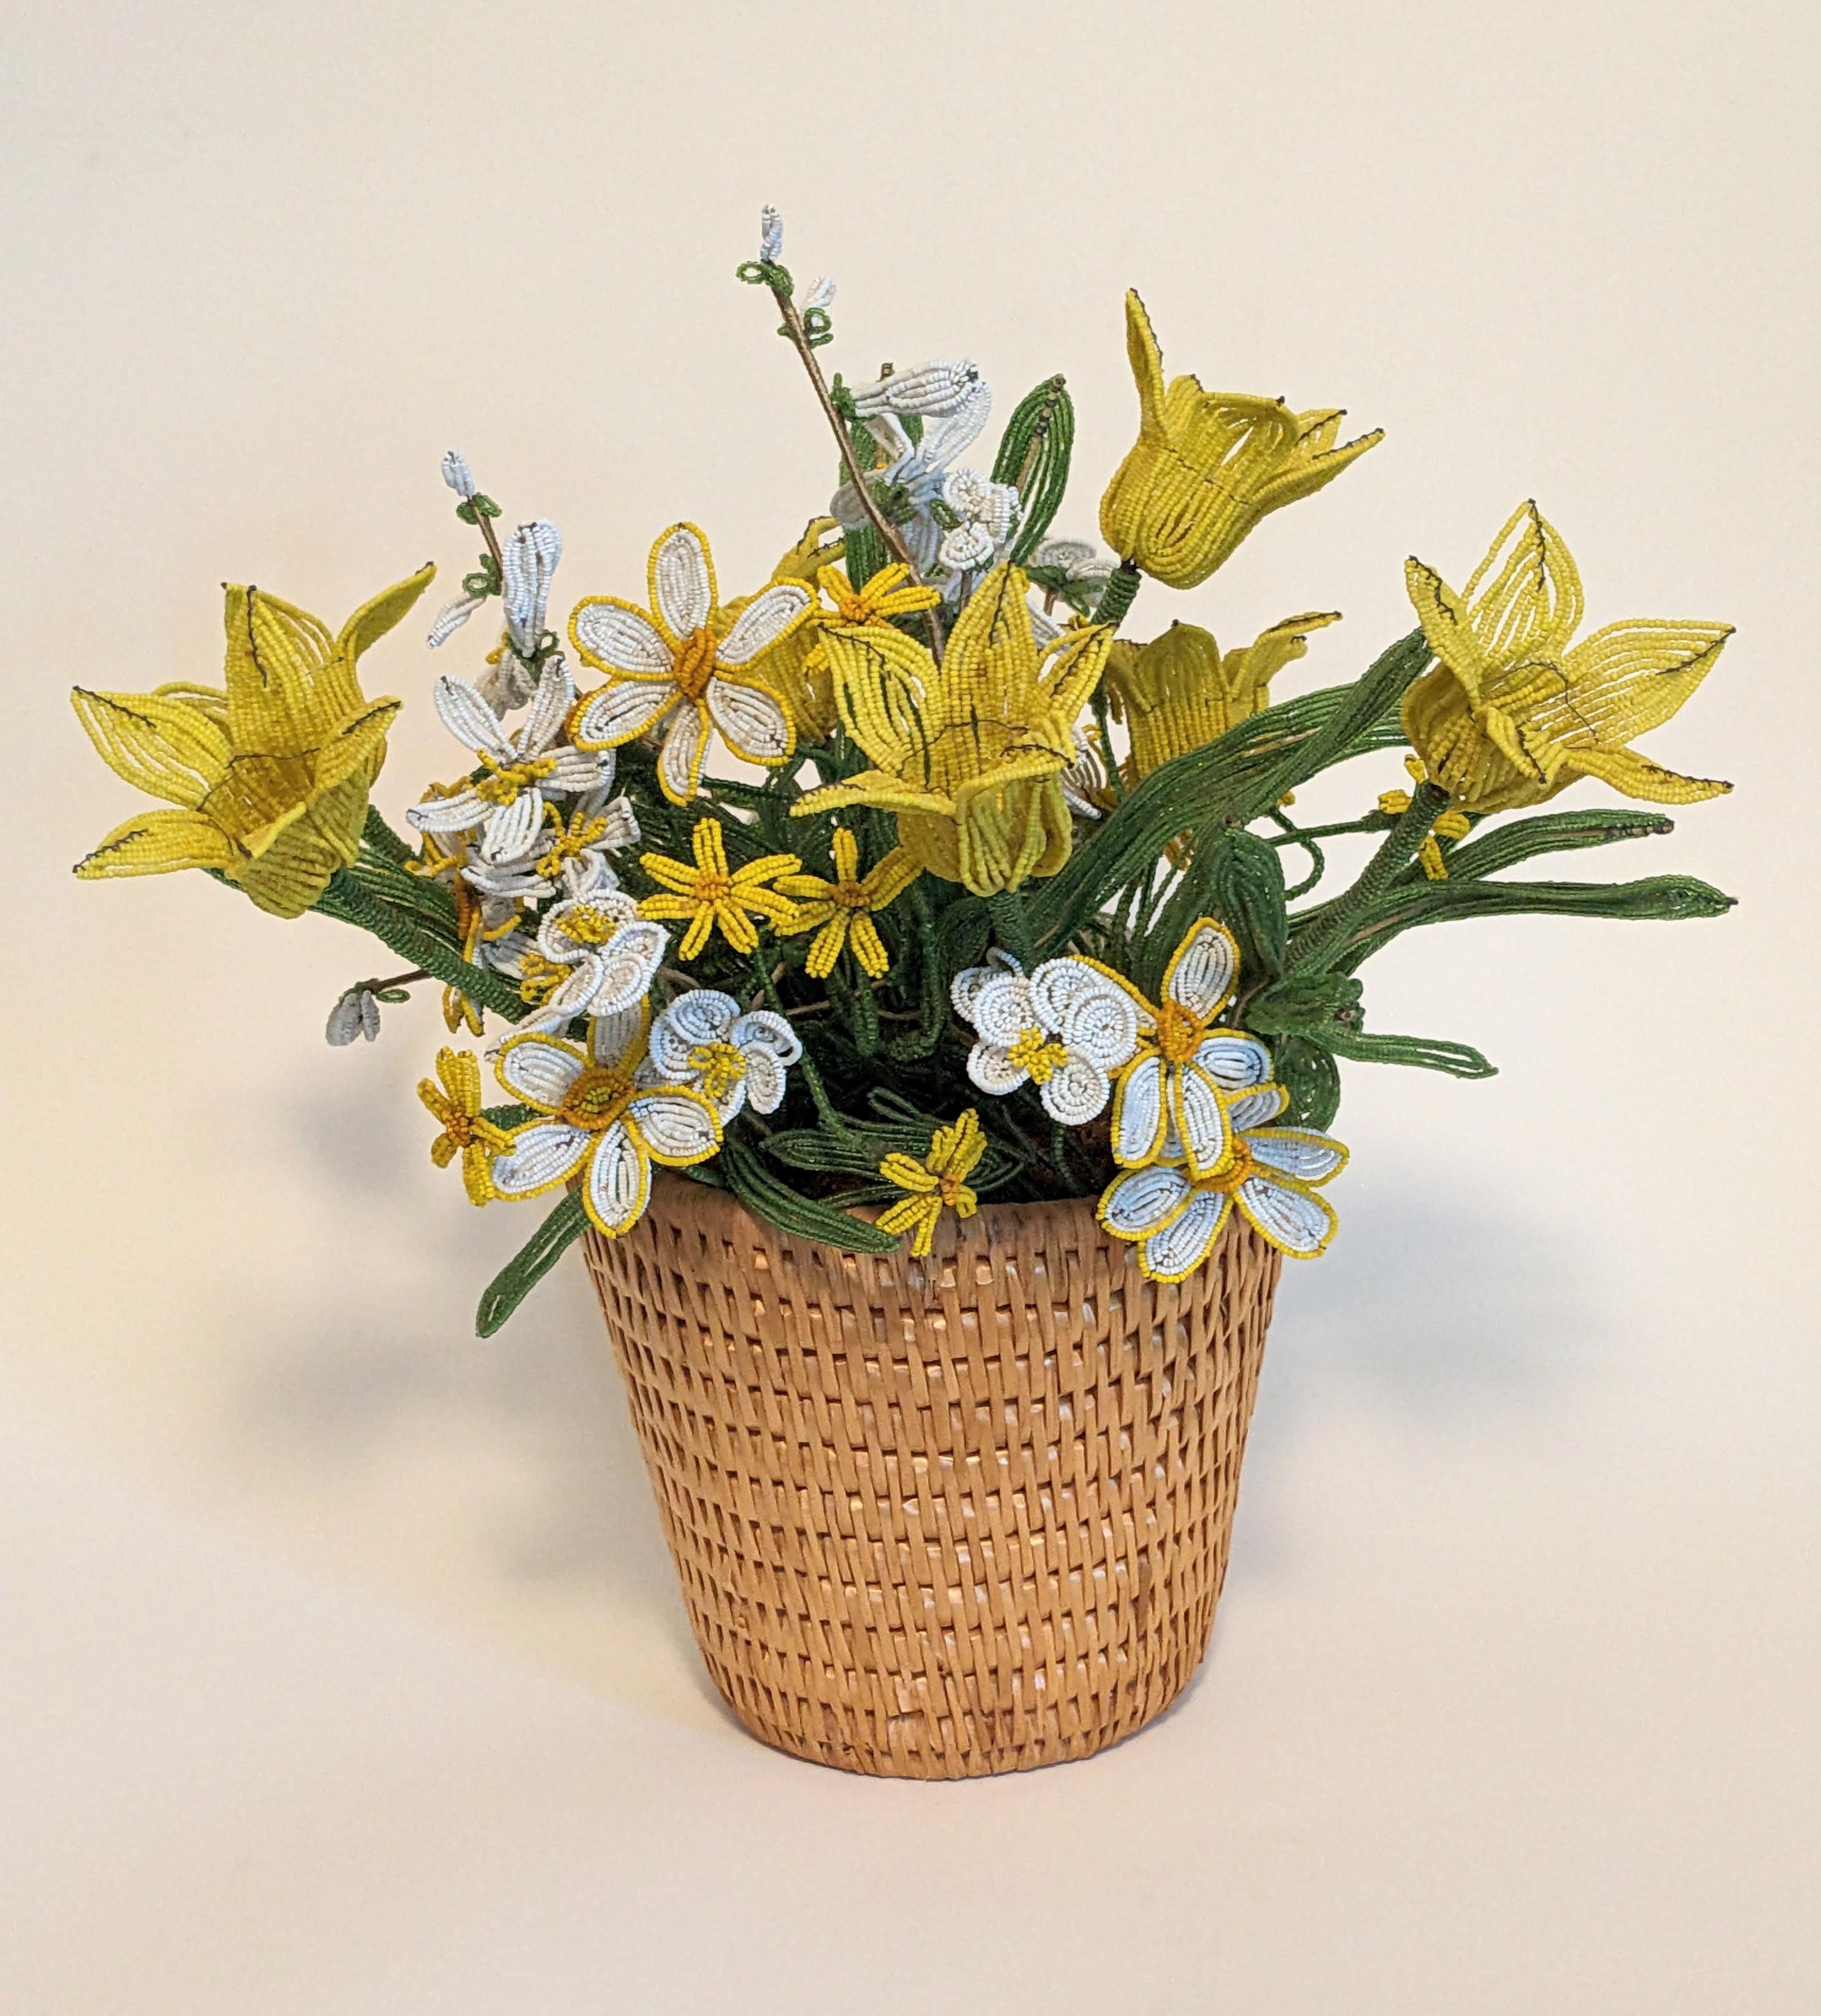 Beaded Tulips Arrangement from the 1960's. The rage for beaded flowers started in the 1960's and ornate labor intensive, professionally made pots were de rigeur in many households throughout the country. 
Pot of hand made Yellow tulips with varied